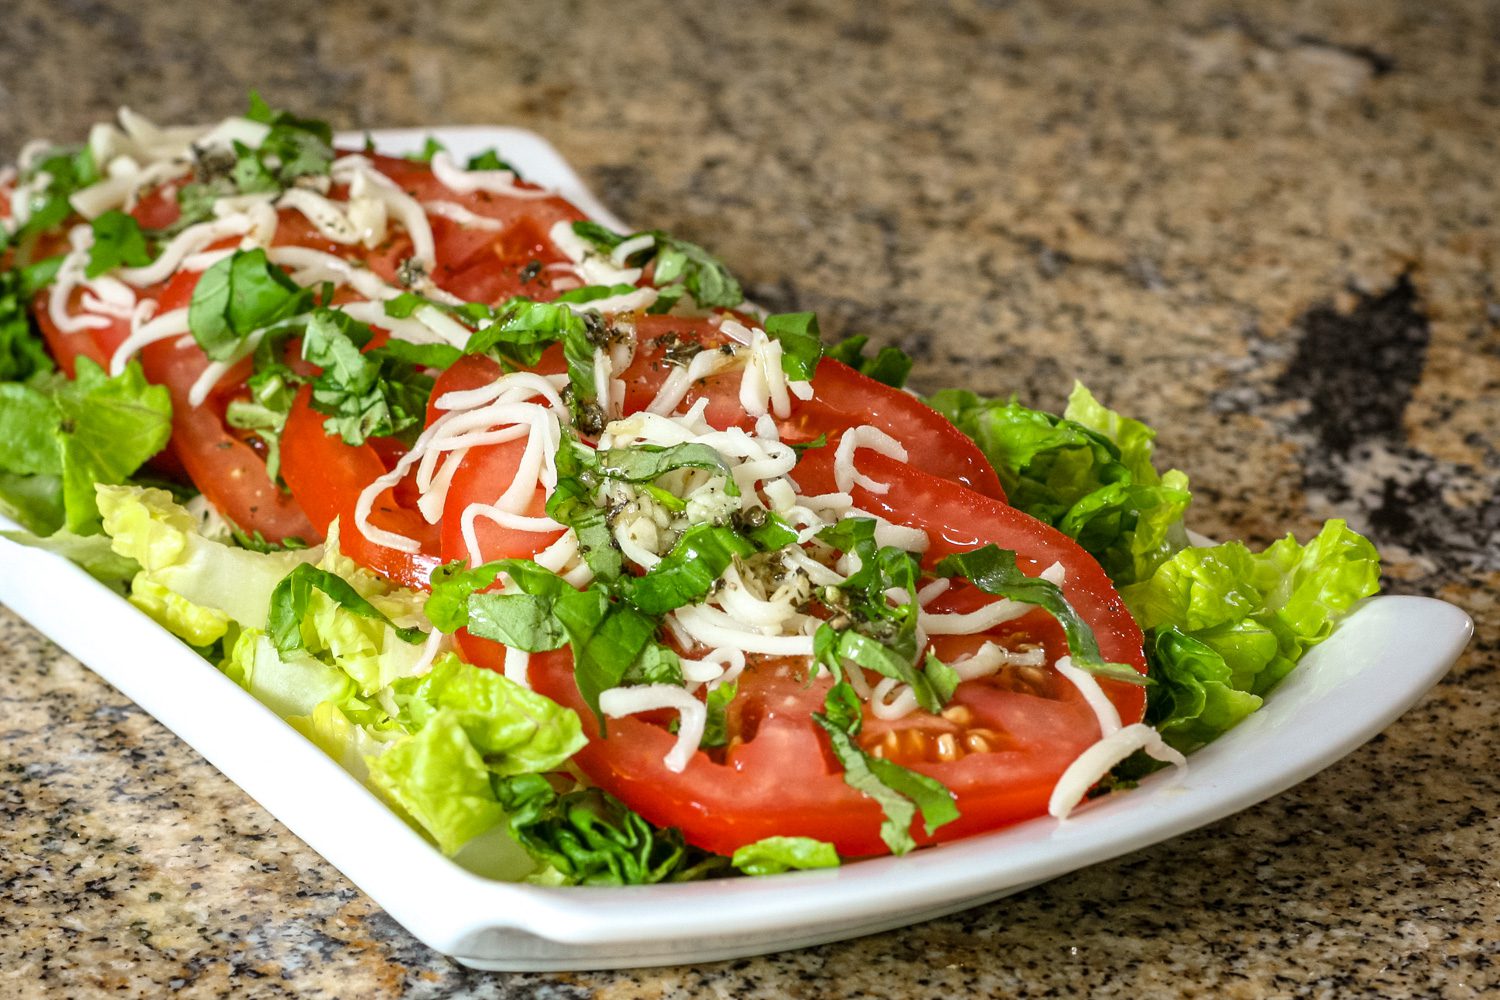 A small serving platter with tomatoes with red wine vinaigrette